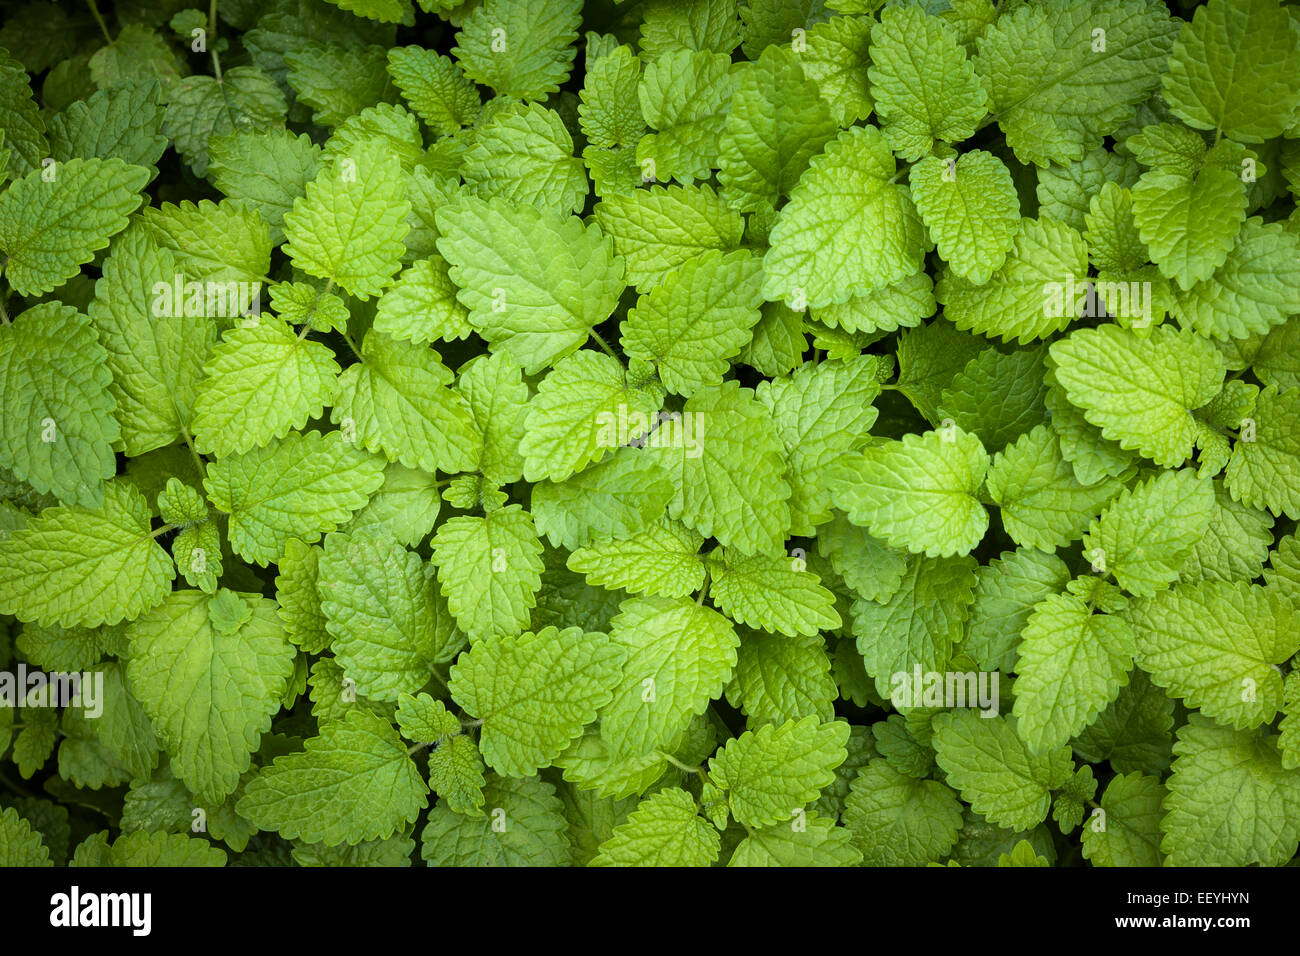 Green lemon balm herb leaves growing in herbal garden from above Stock Photo